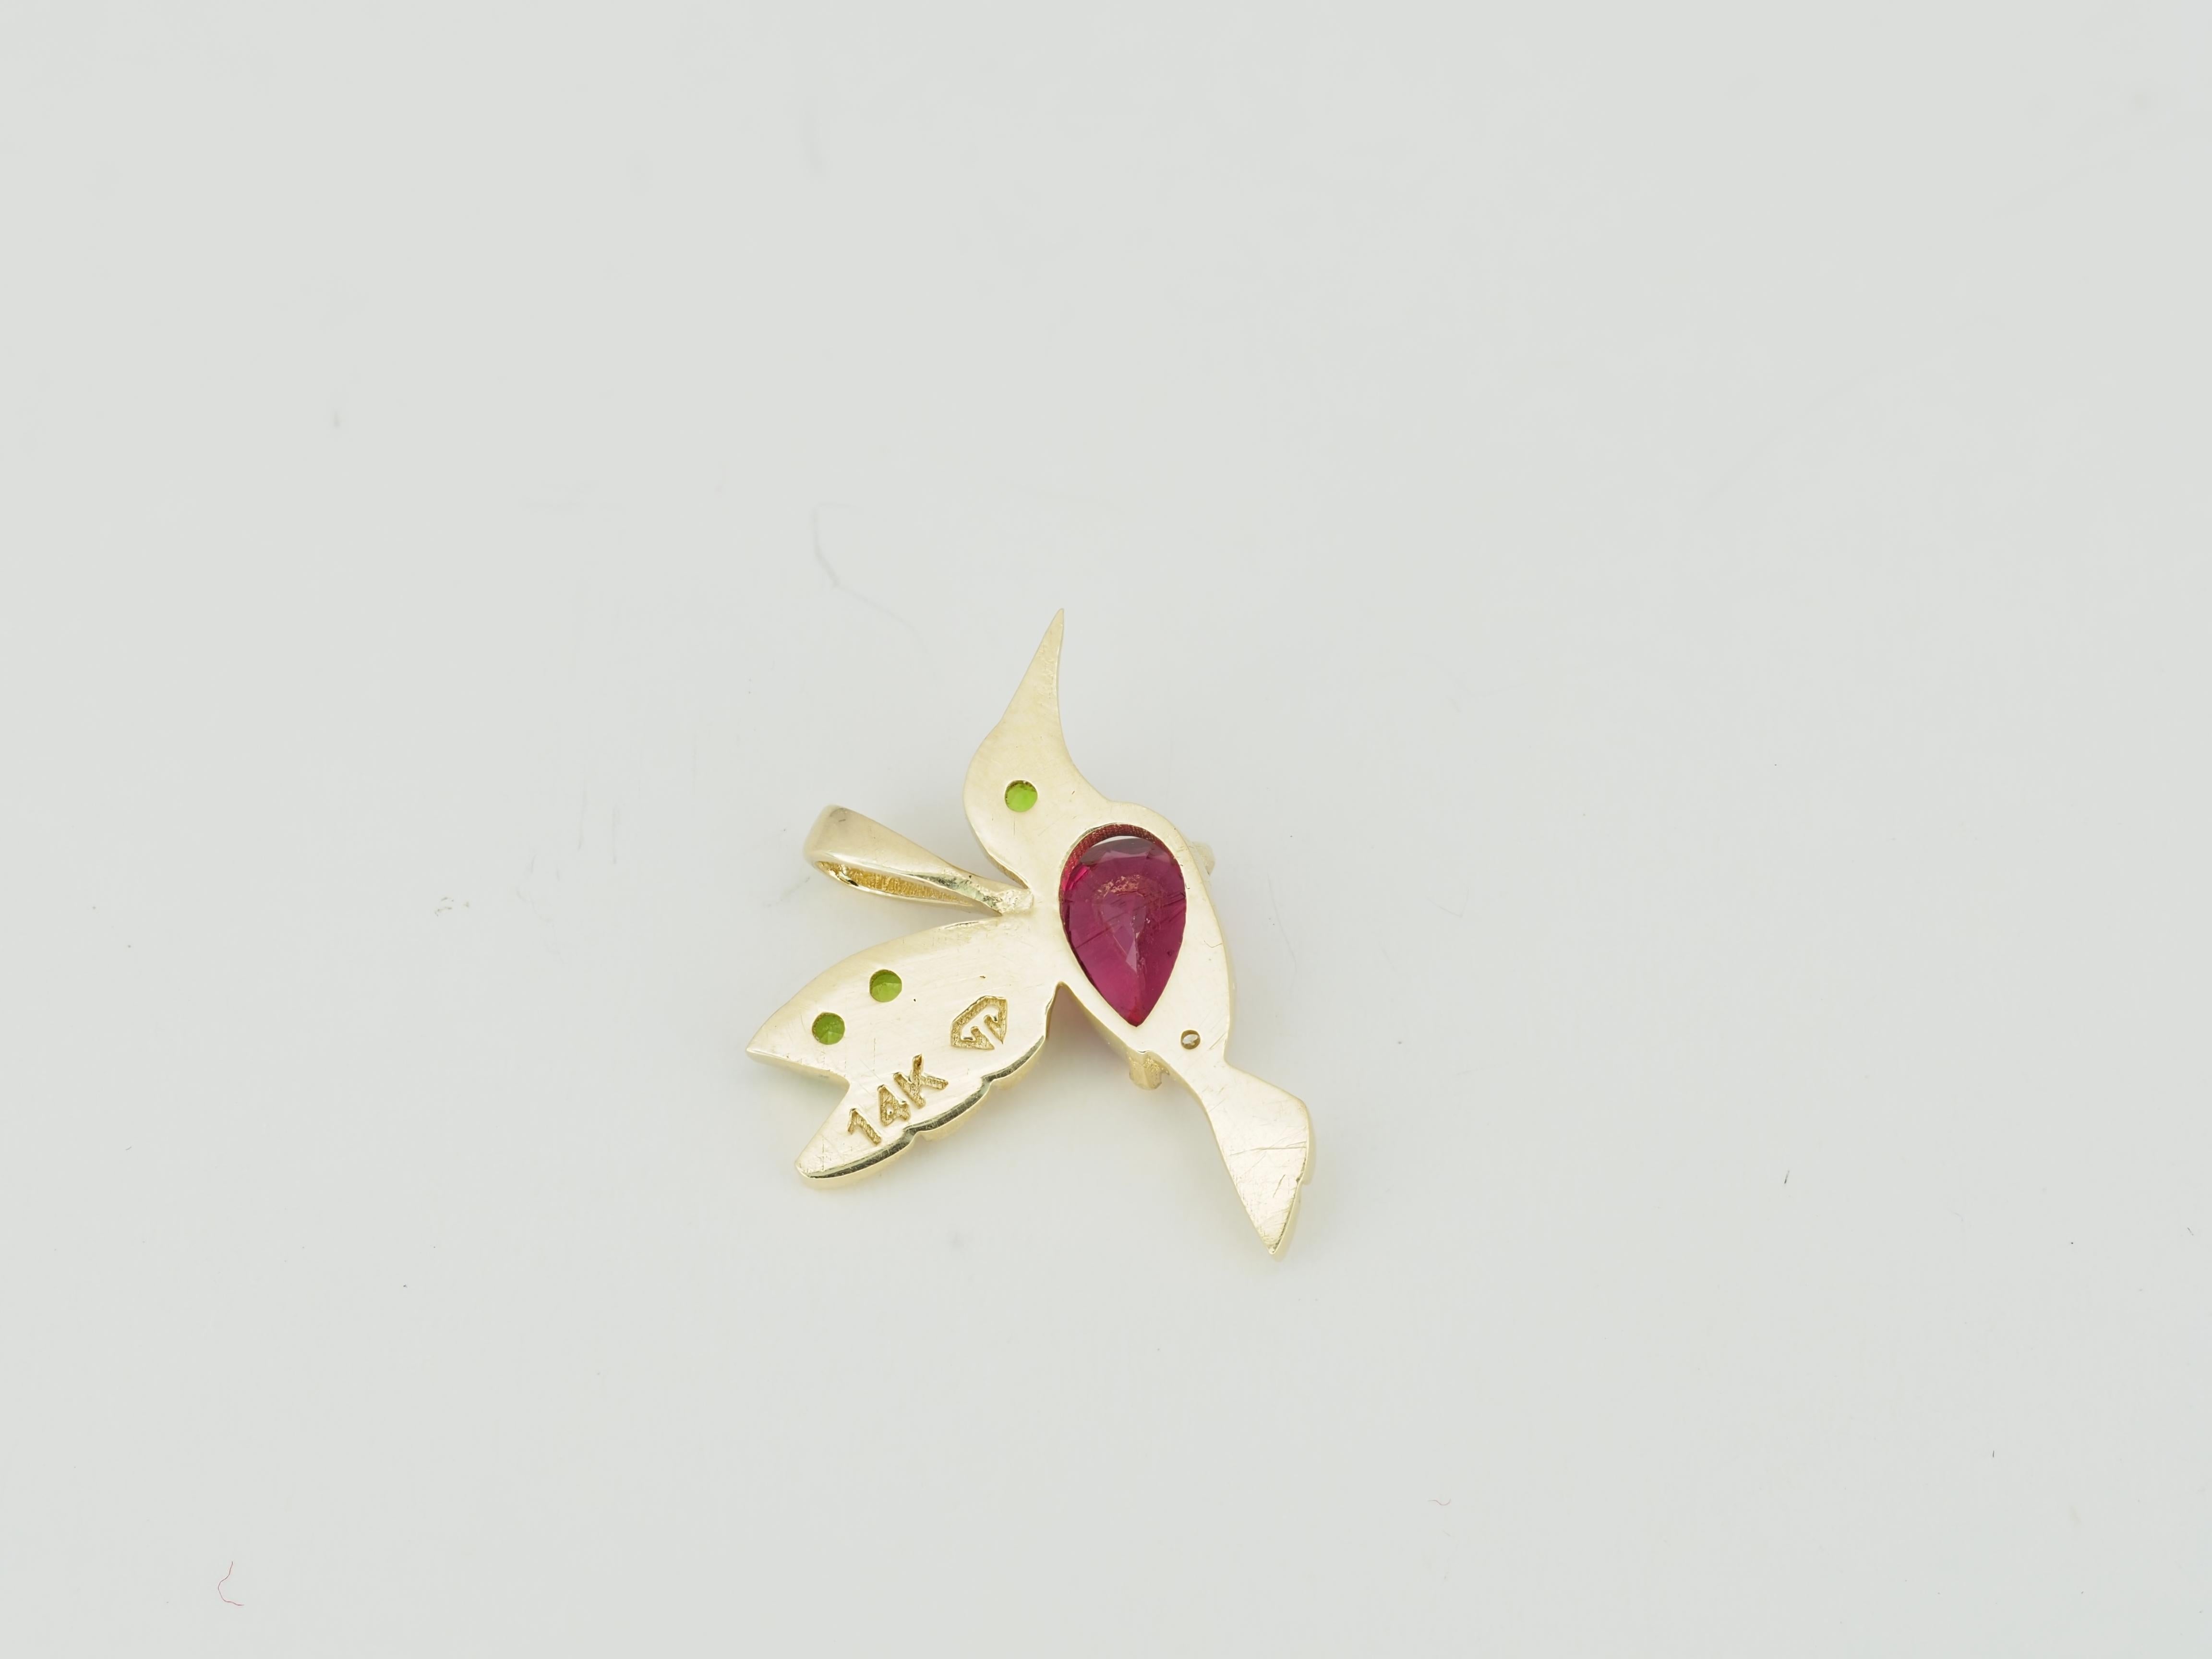 14k Gold Hummingbird Pendant with Rubies, Bird Pendant with Colored Gemstones For Sale 2